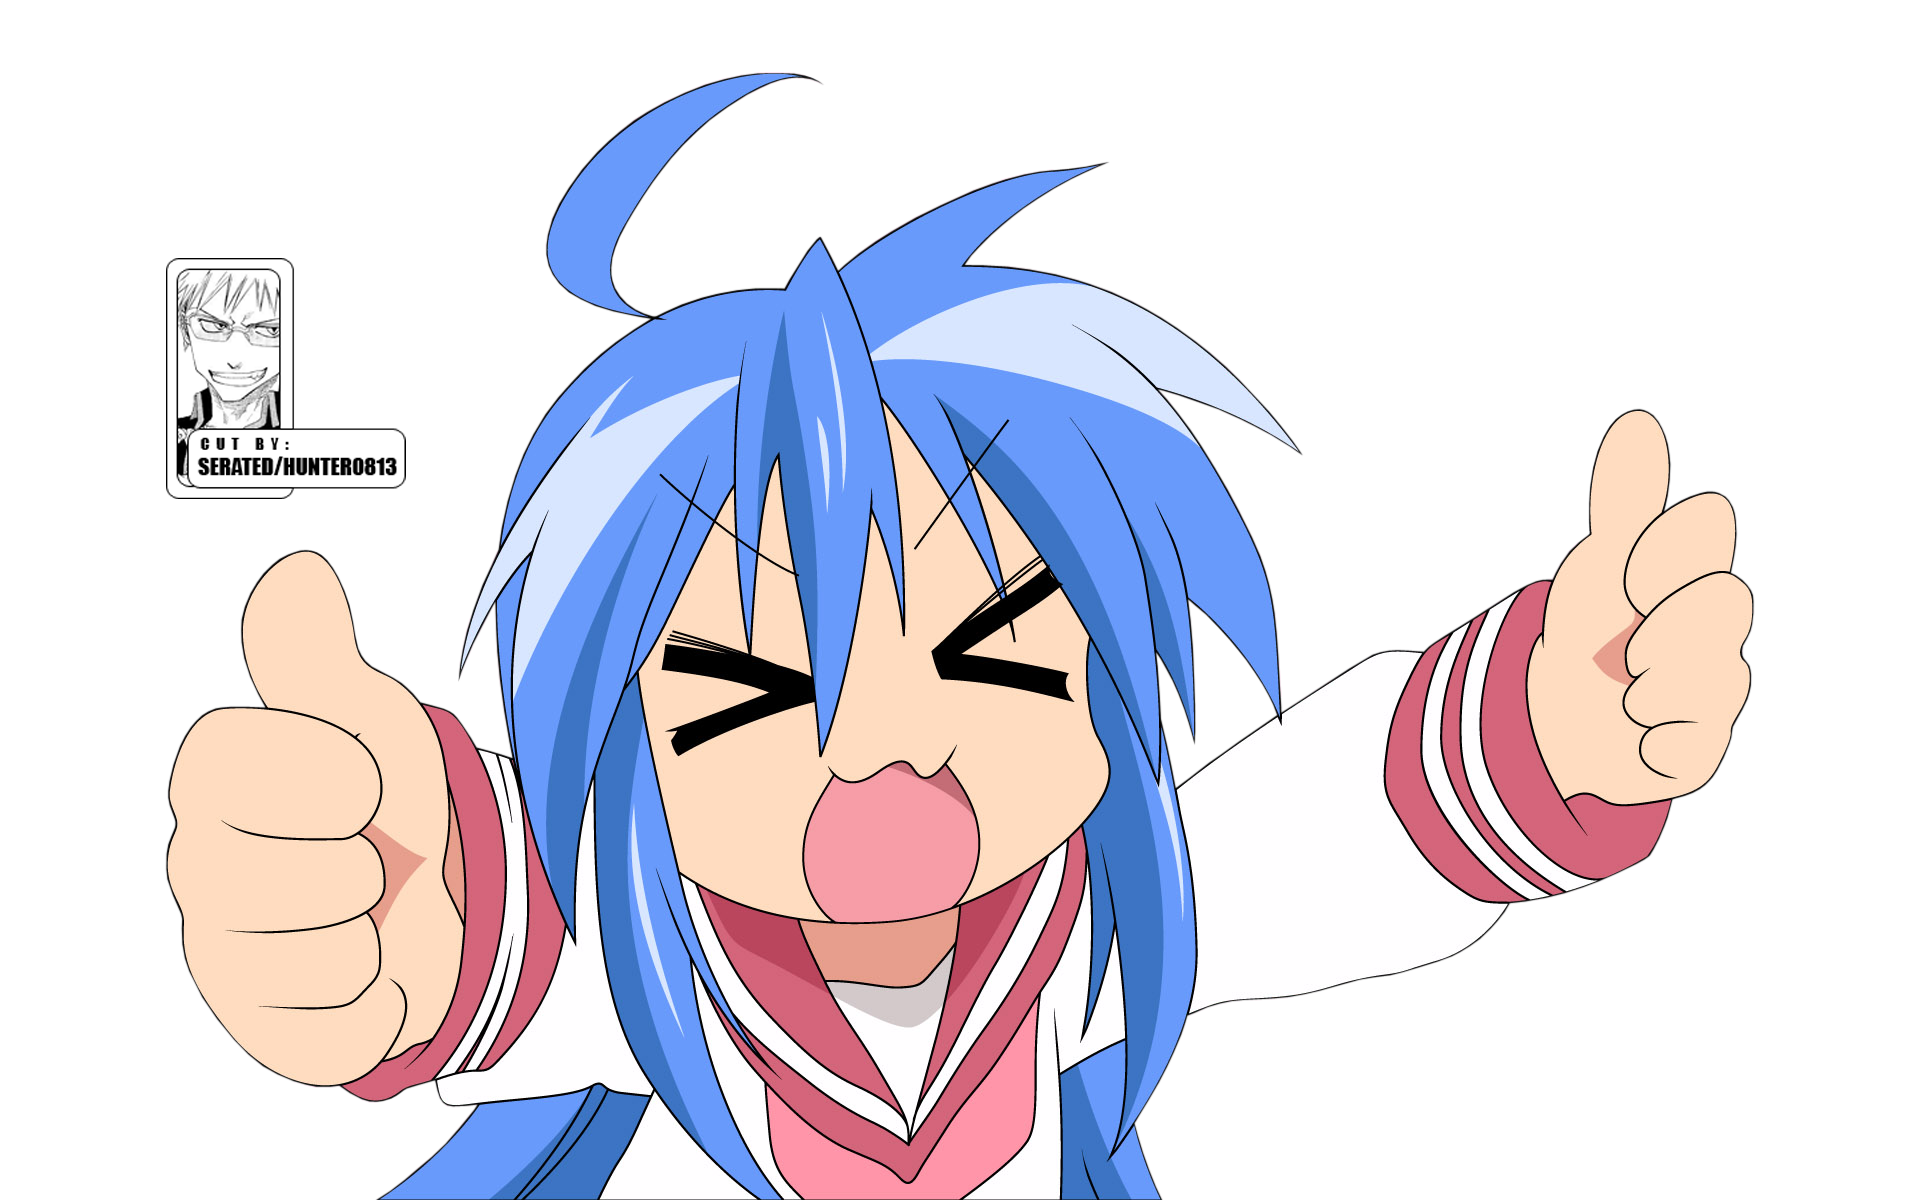 http://yinyanganime.com/serated/Extractions/Anime/Lucky%20Star/Konata-Render.png